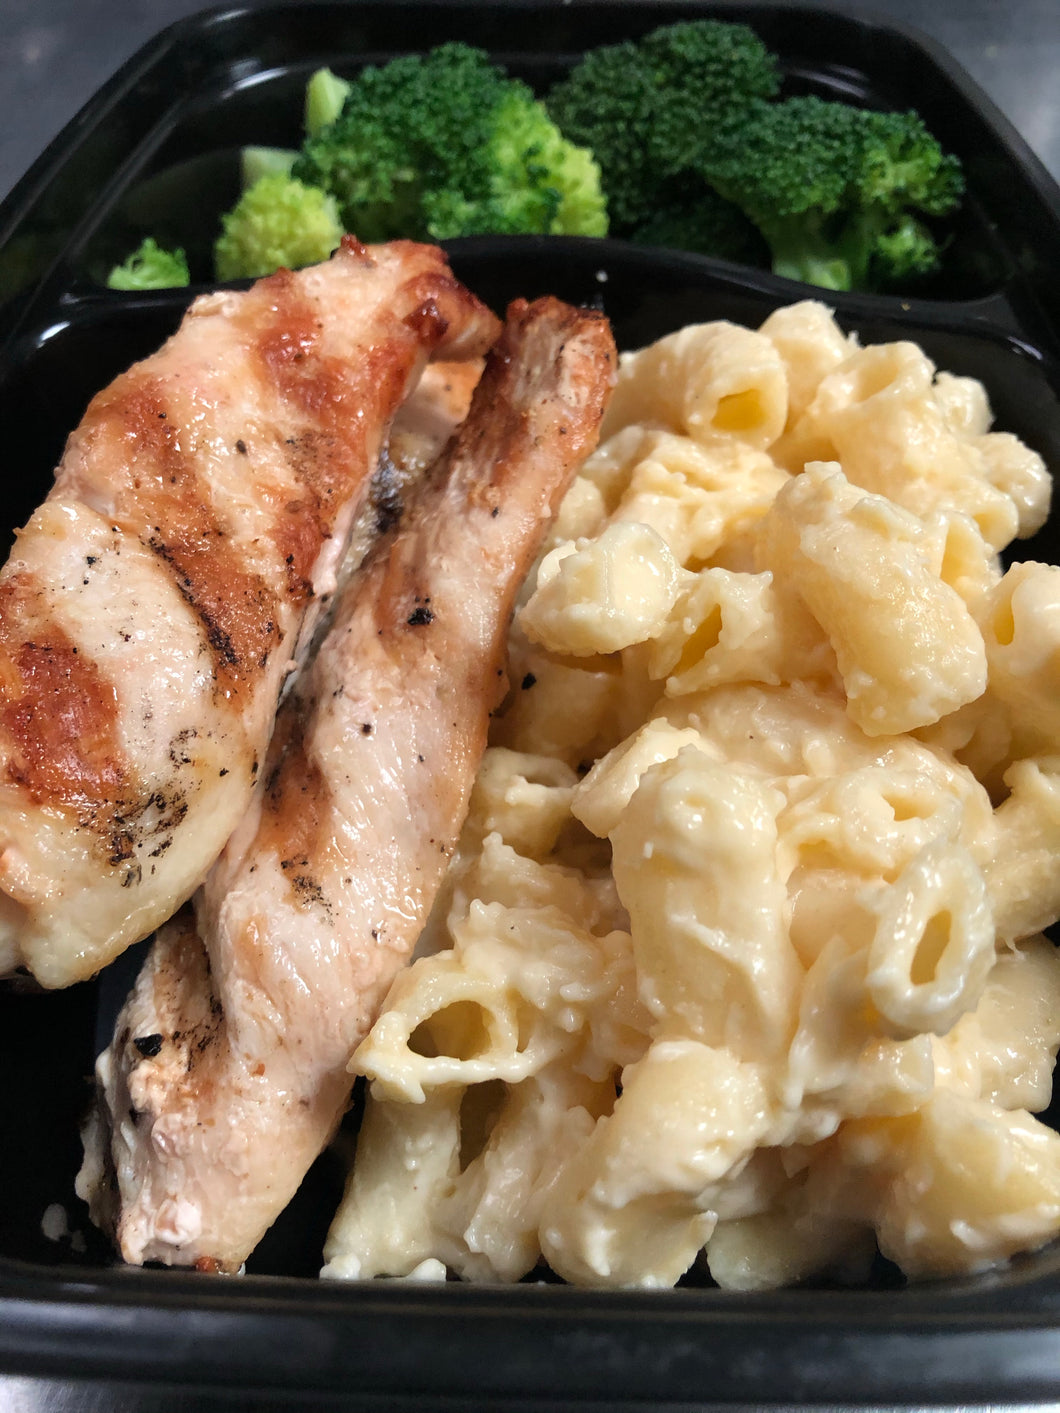 Grilled Chicken and Mac with steamed broccoli